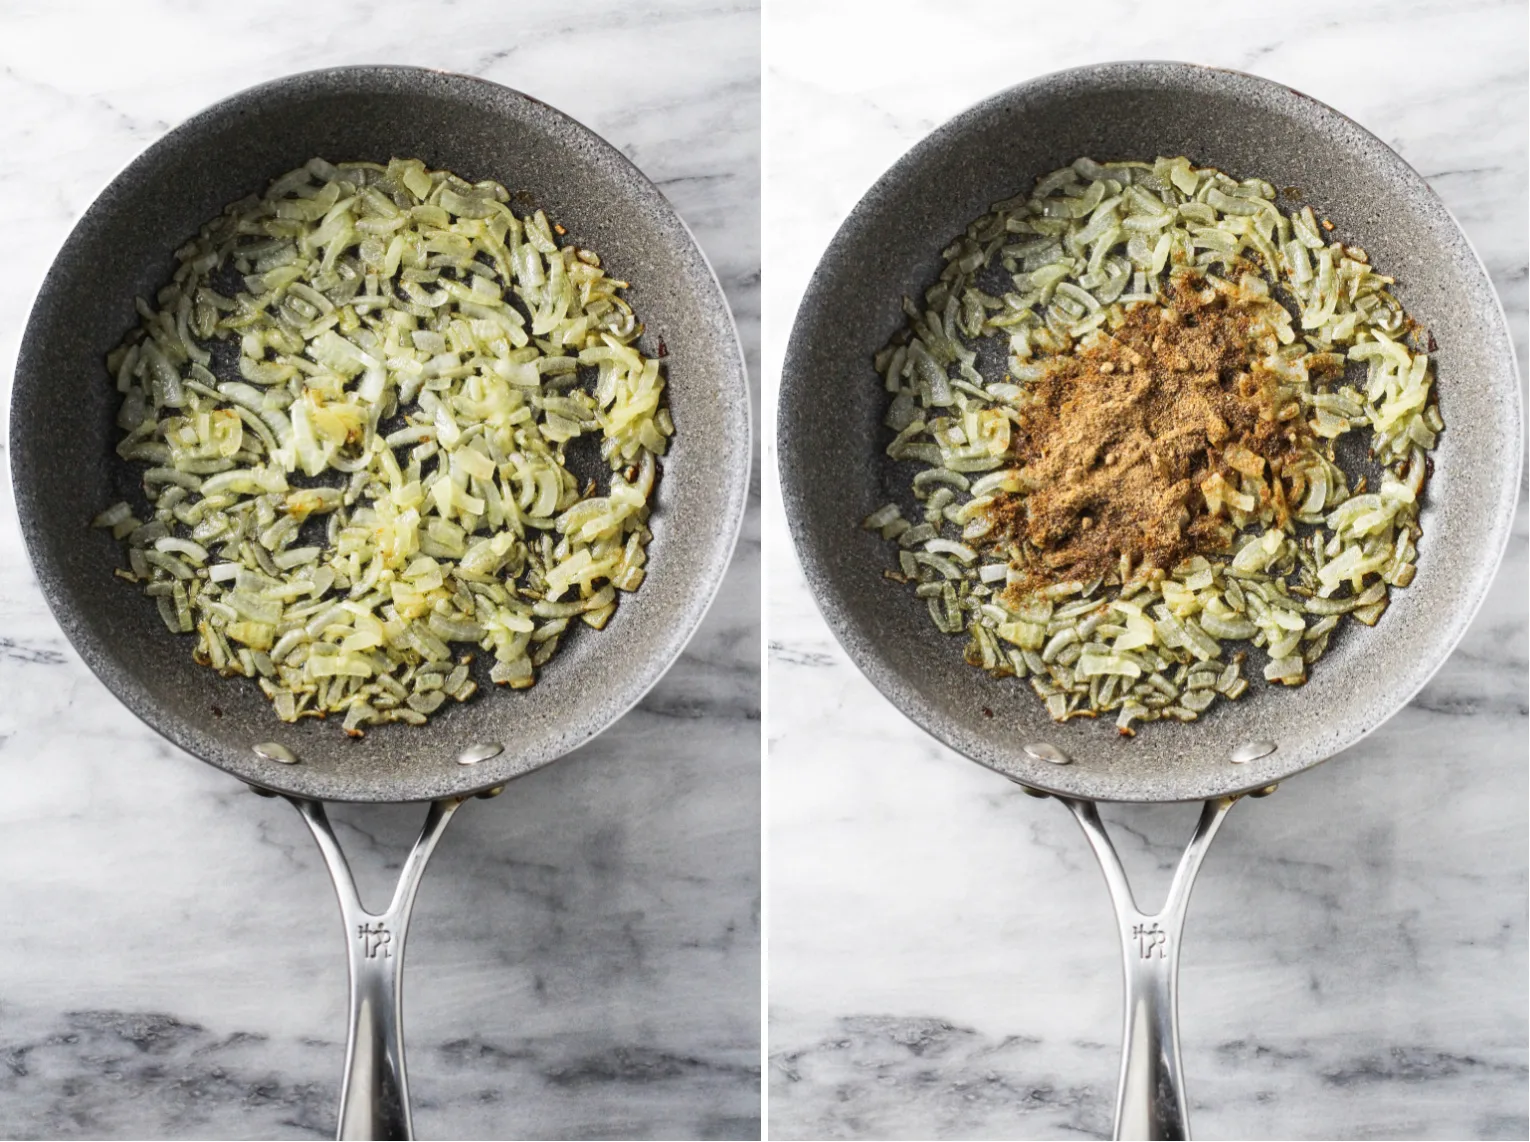 Collage of two images side-by-side. On the left, there is an overhead shot of onions in a pan. On the right, an overhead shot of onions and spices in a pan.